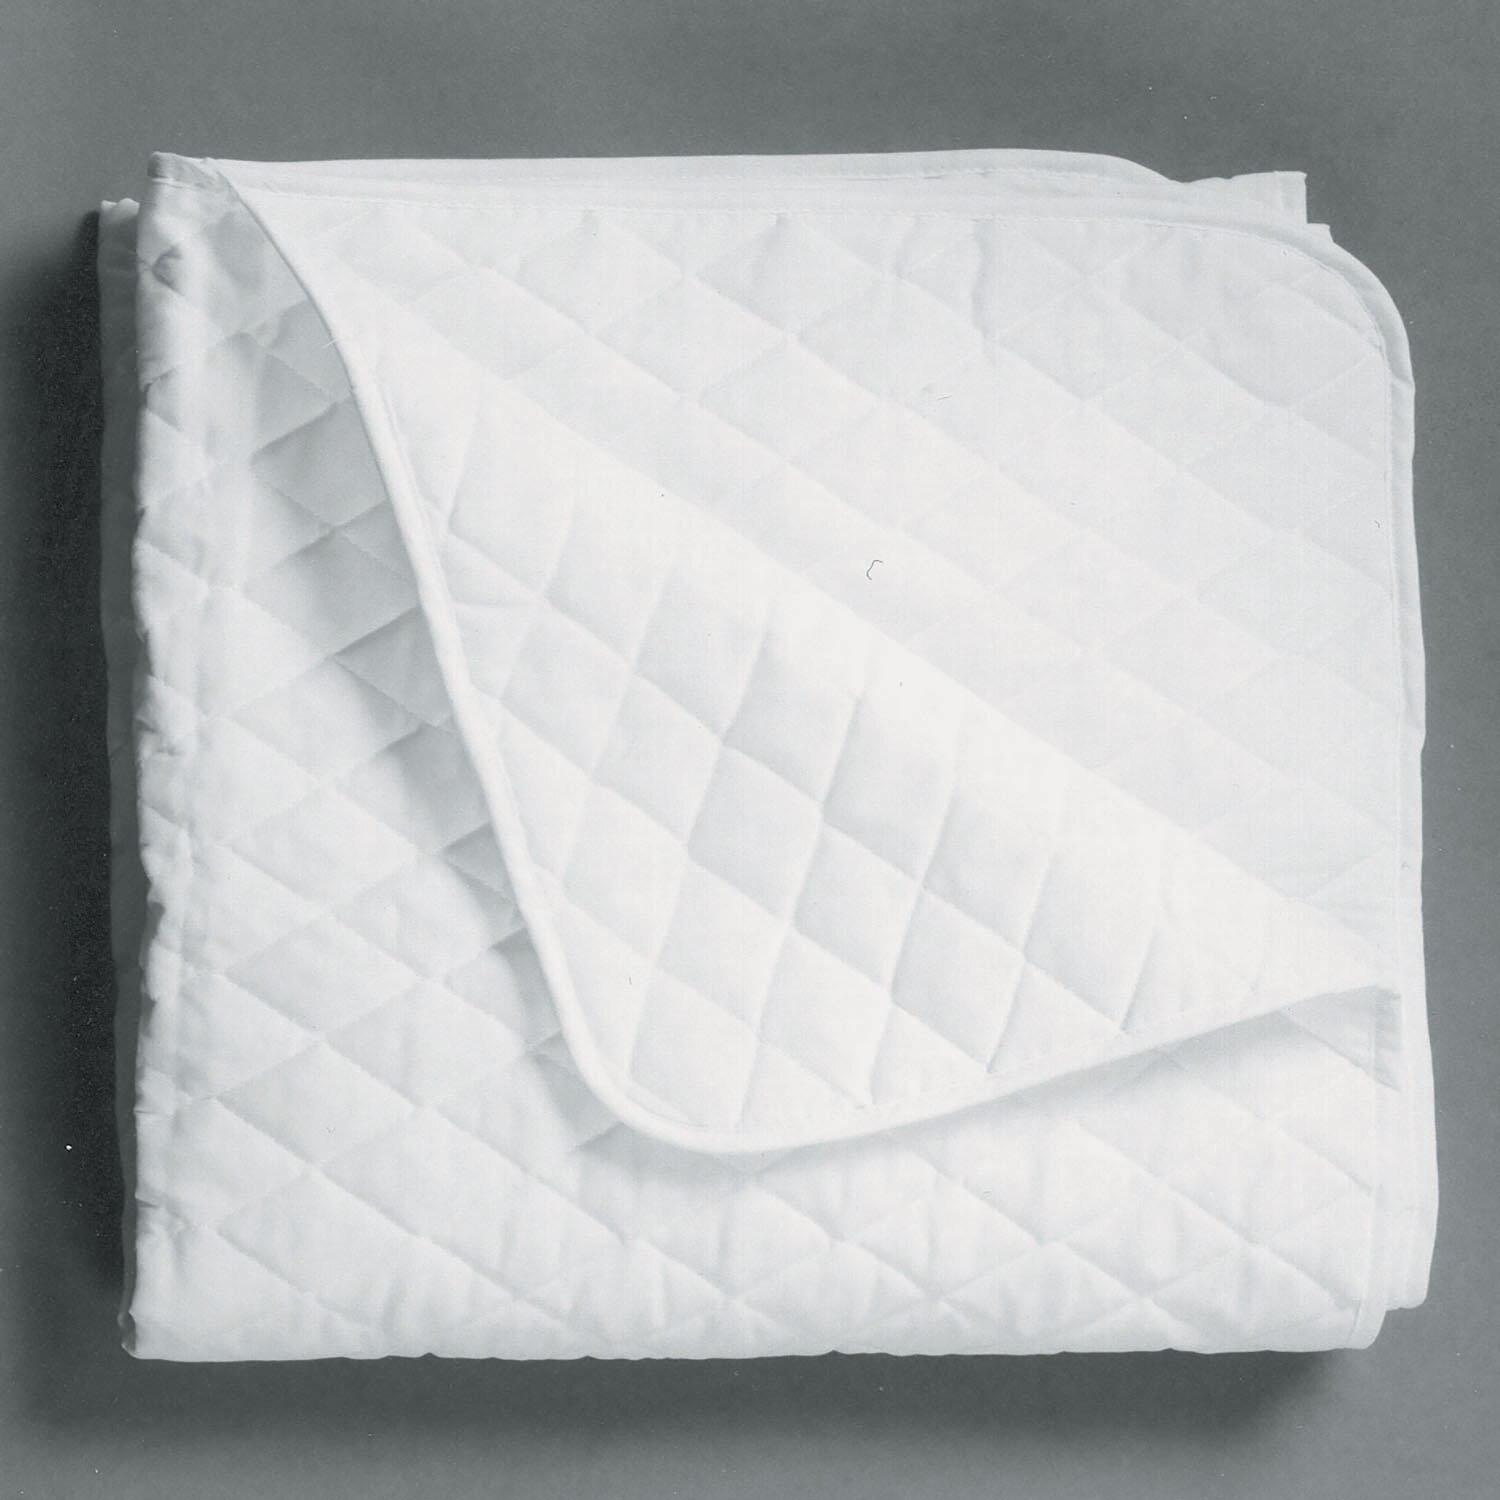 Pad, Mattress, Quilted, White, 36" x 75"